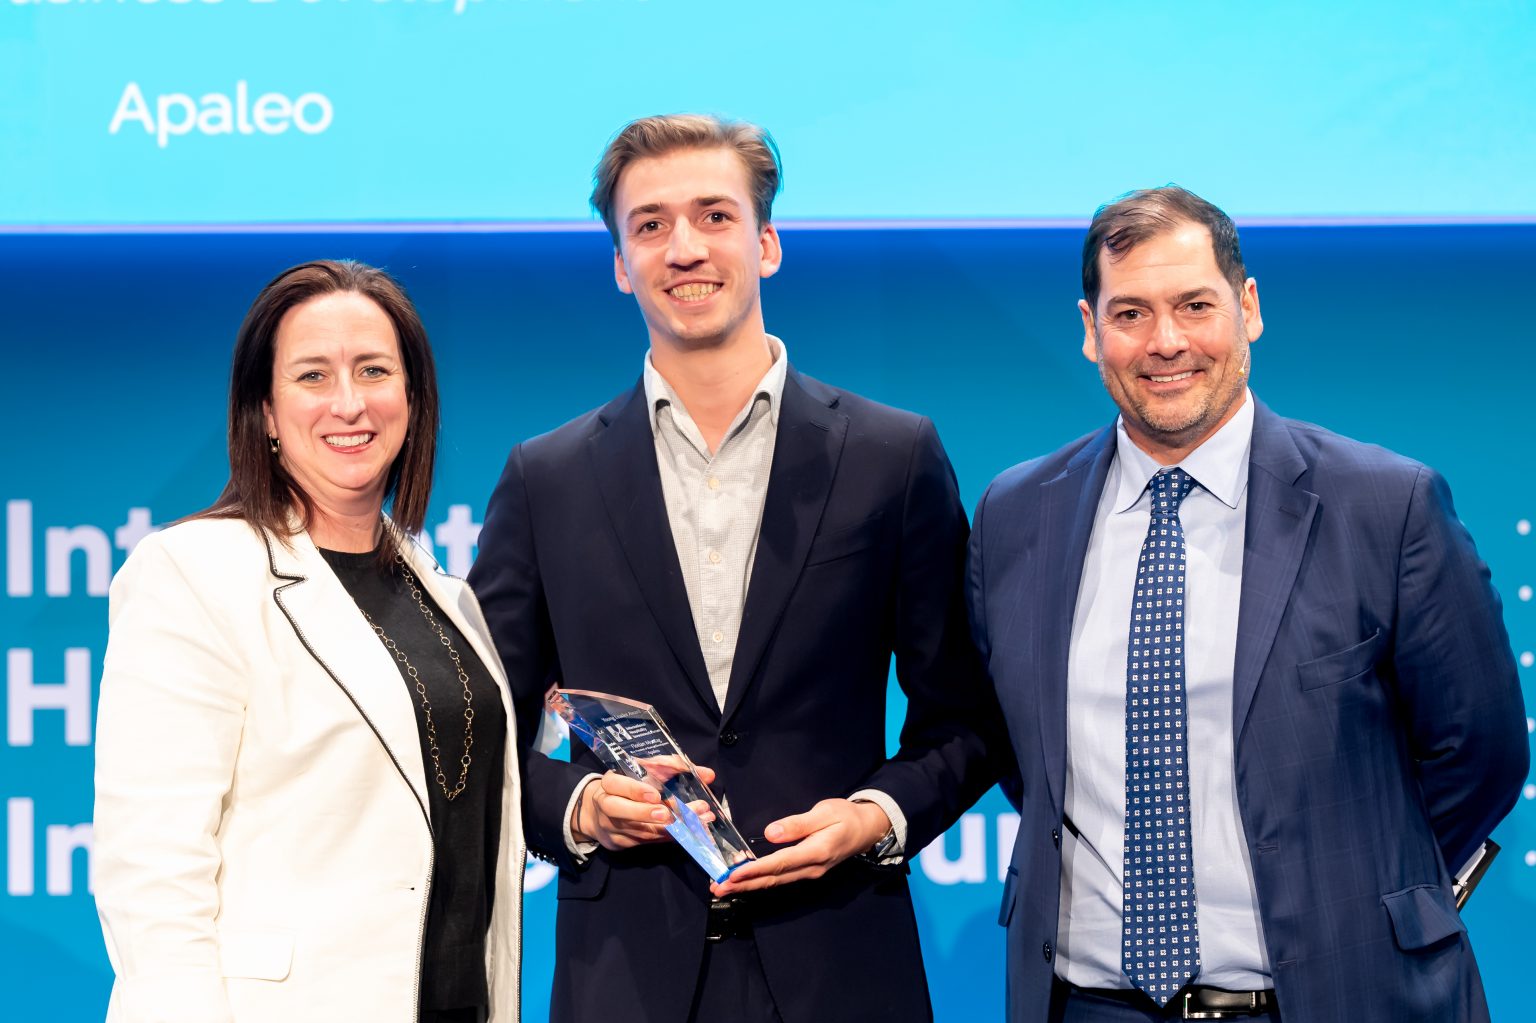 Pictured left to right: Andrea Belfanti, CEO, ISHC, Florian Montag, VP of Business Development, Apaleo, Alexi Khajavi, President, Hospitality and Travel, Questex